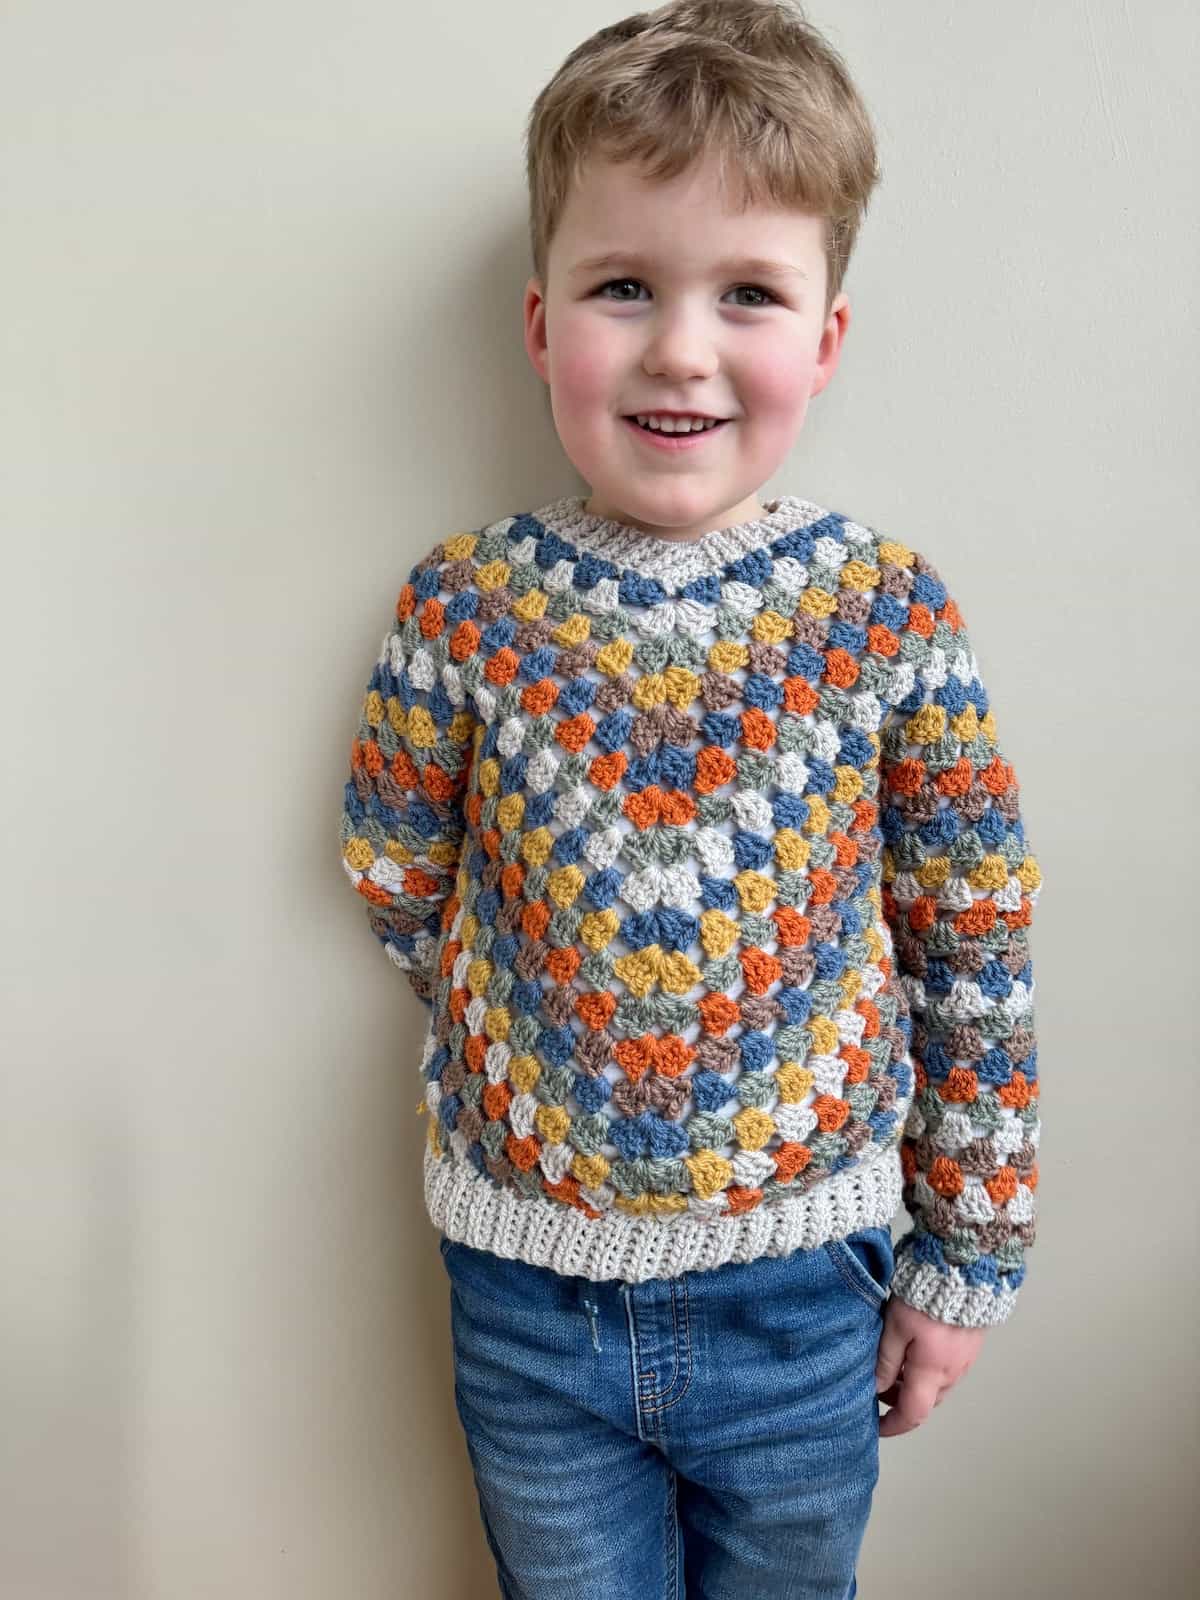 A young child in a crocheted sweater.